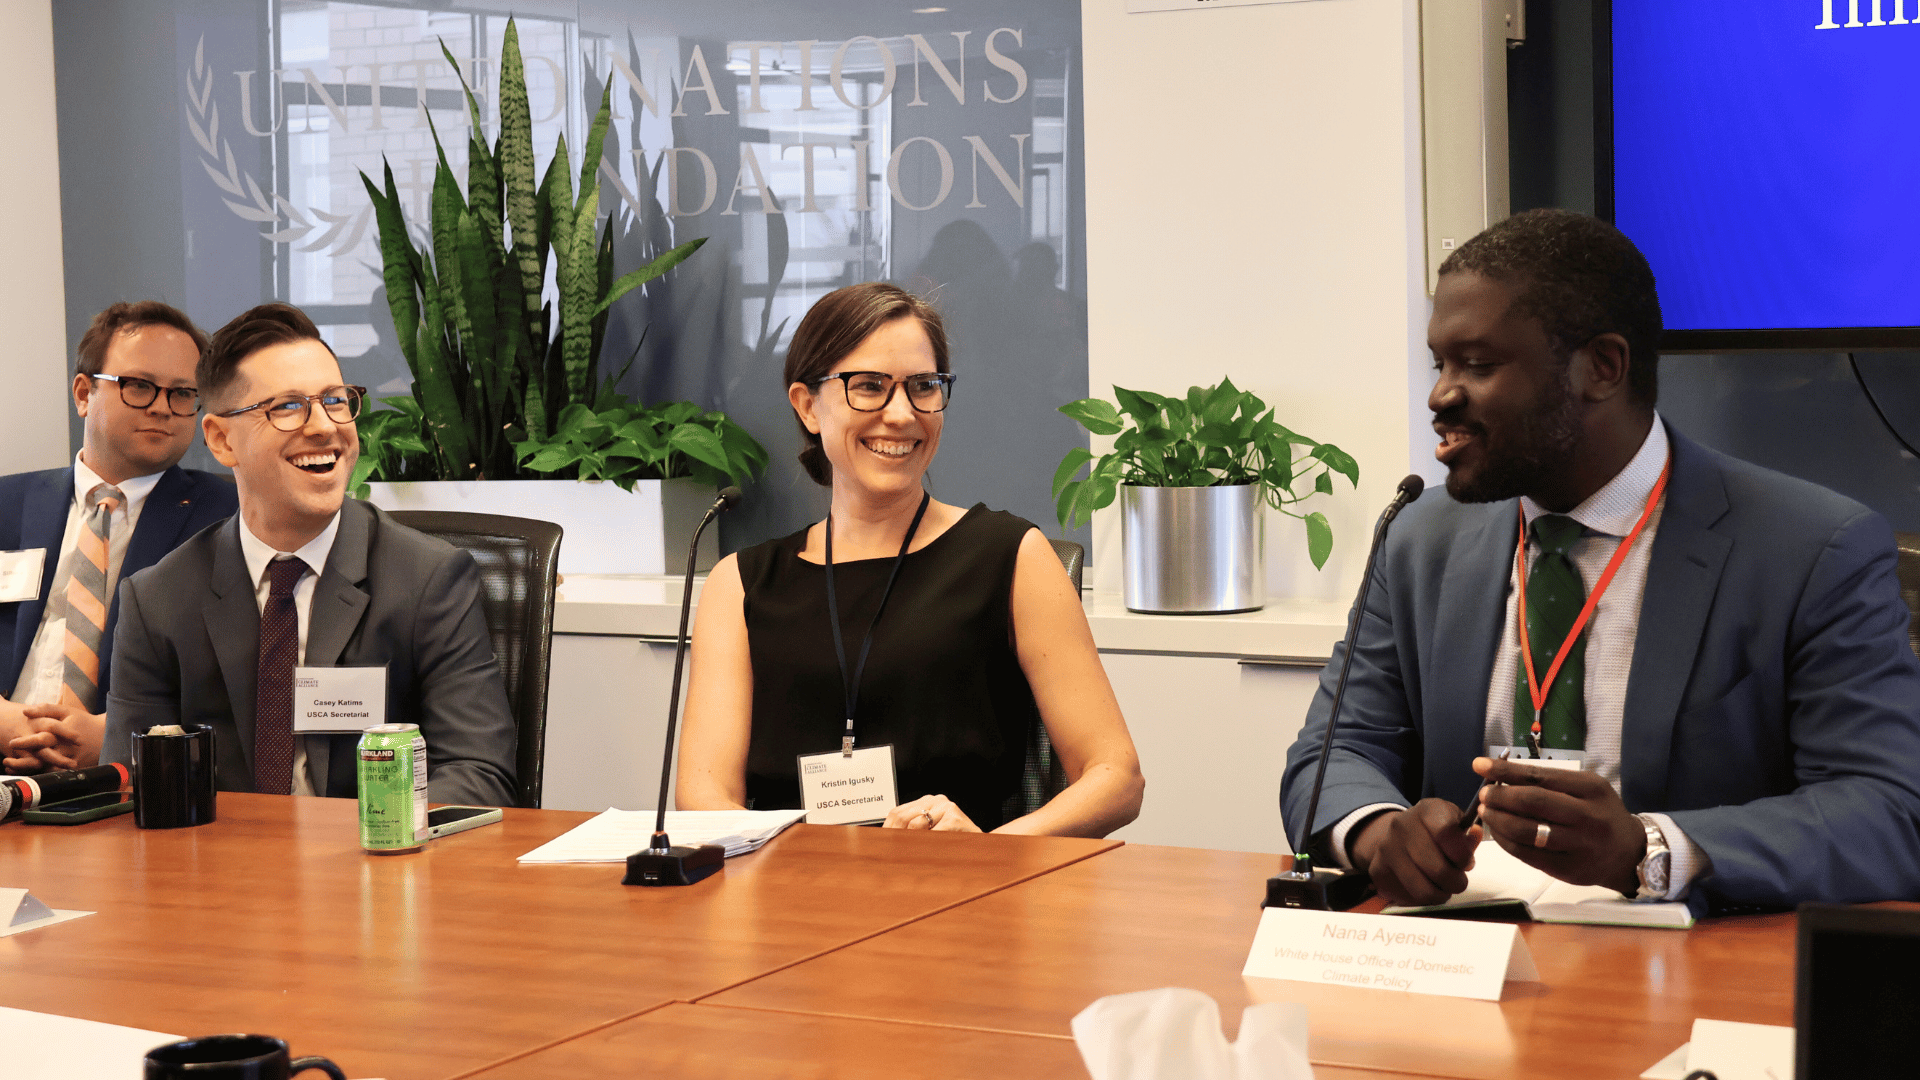 Casey Katims, Alliance Executive Director, Kristin Igusky, Alliance Director of Programs & Analysis, and Nana Ayensu, Special Assistant to the President for Climate Policy, Finance, and Innovation.